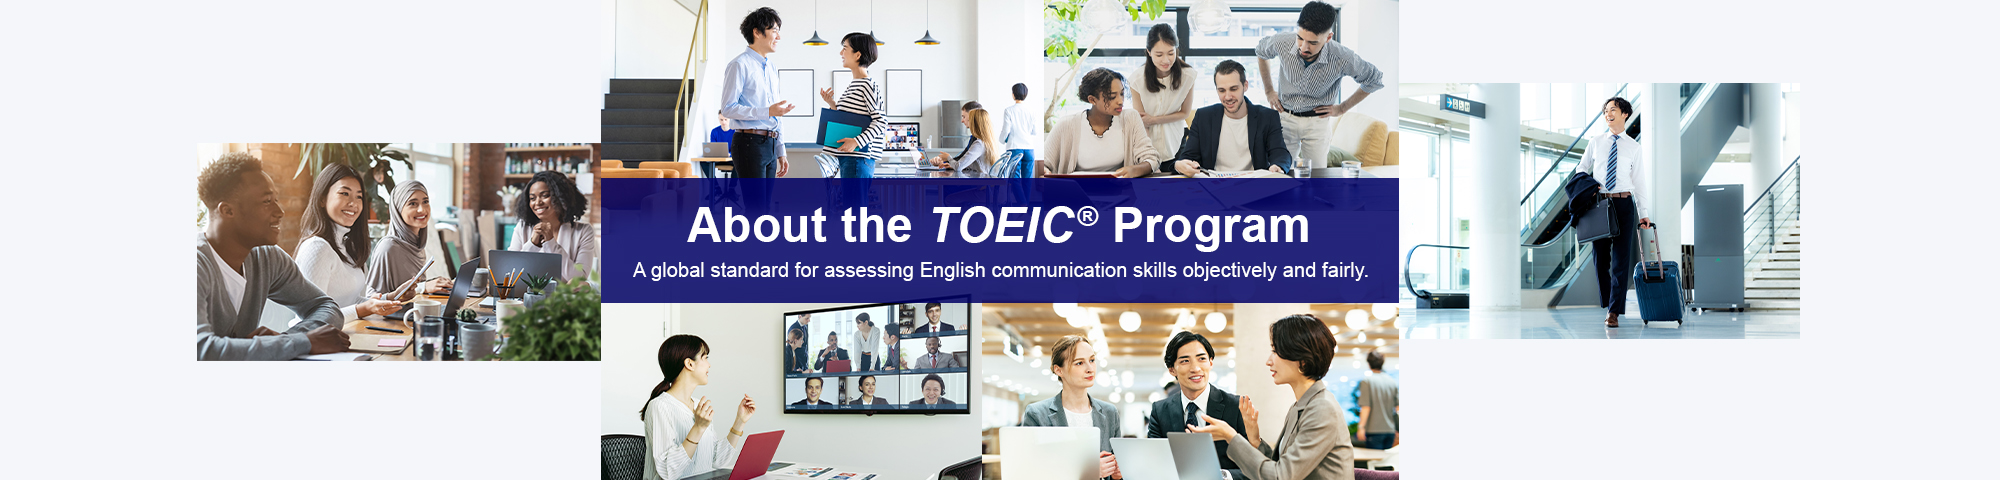 About the TOEIC Program A global standard for assessing English communication skills objectively and fairly.